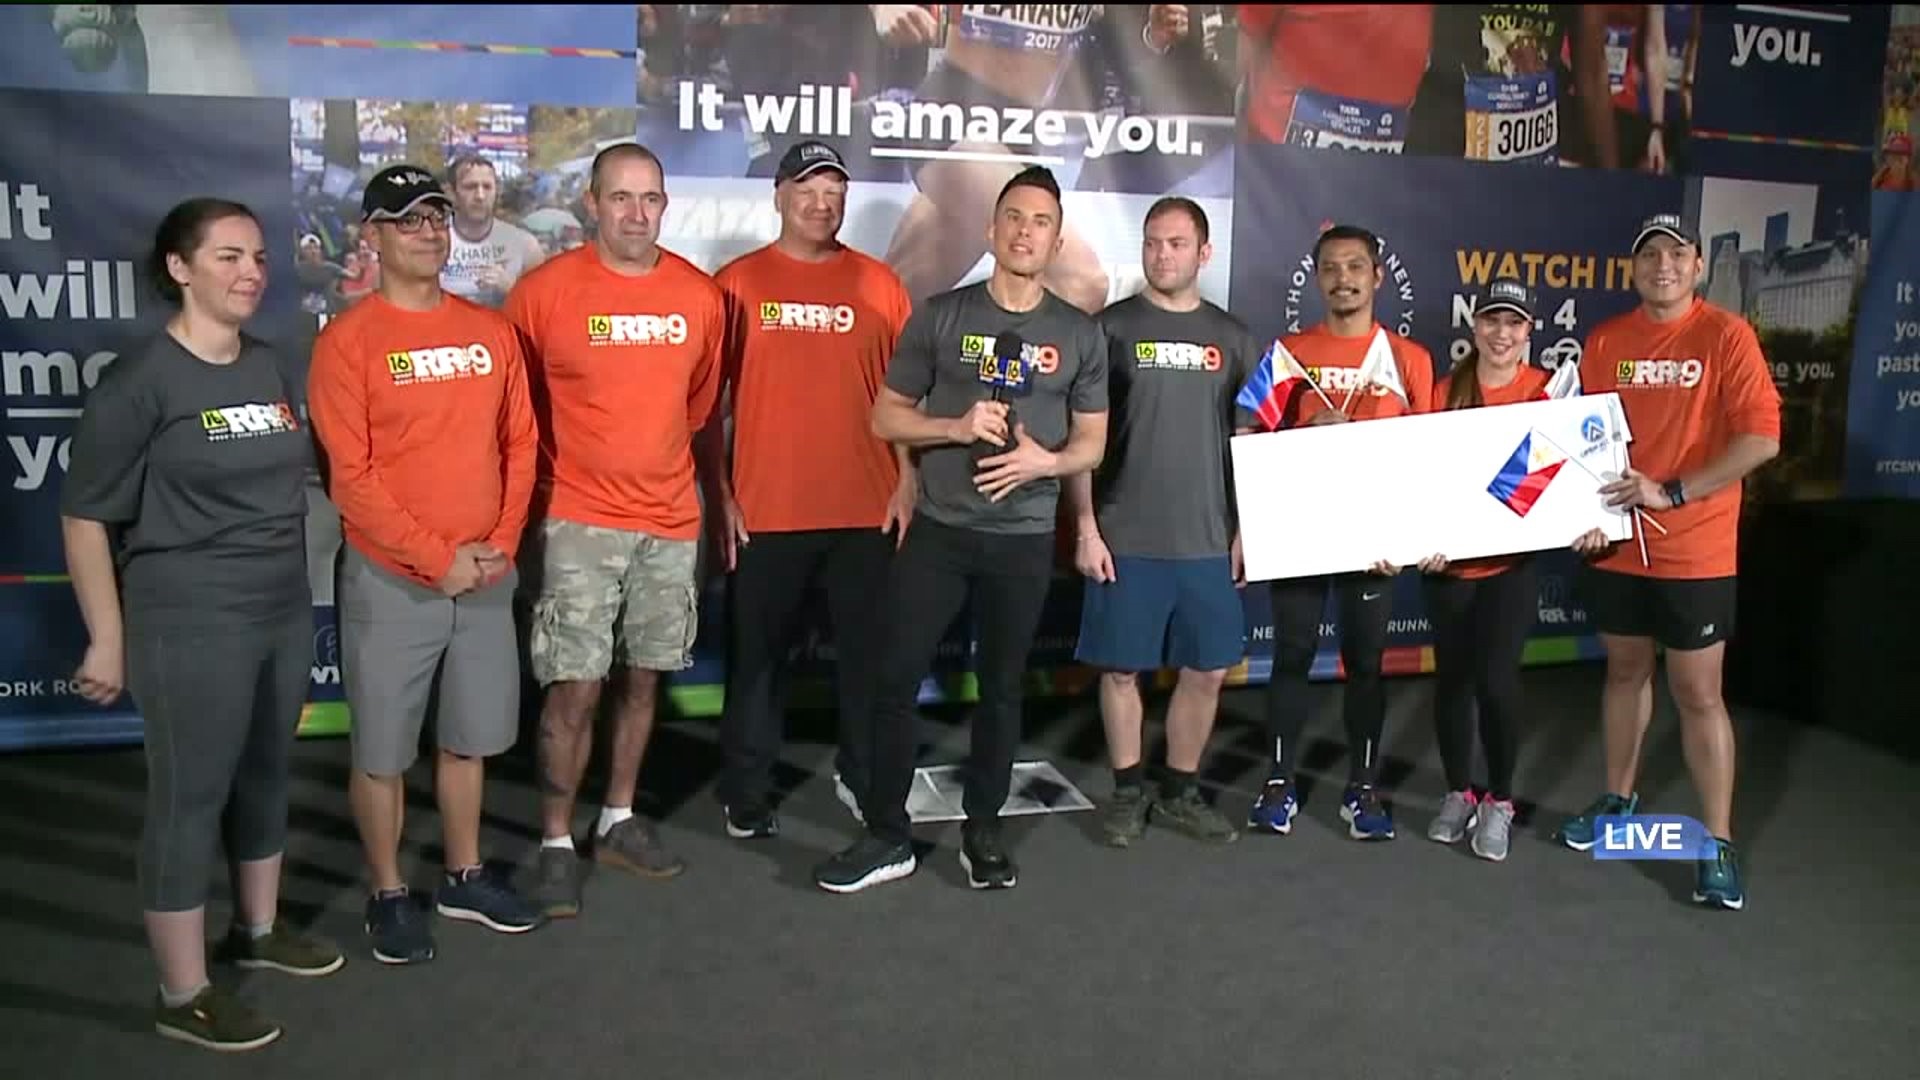 Friends From the Philippines Donate $25,000 to Ryan's Run 9